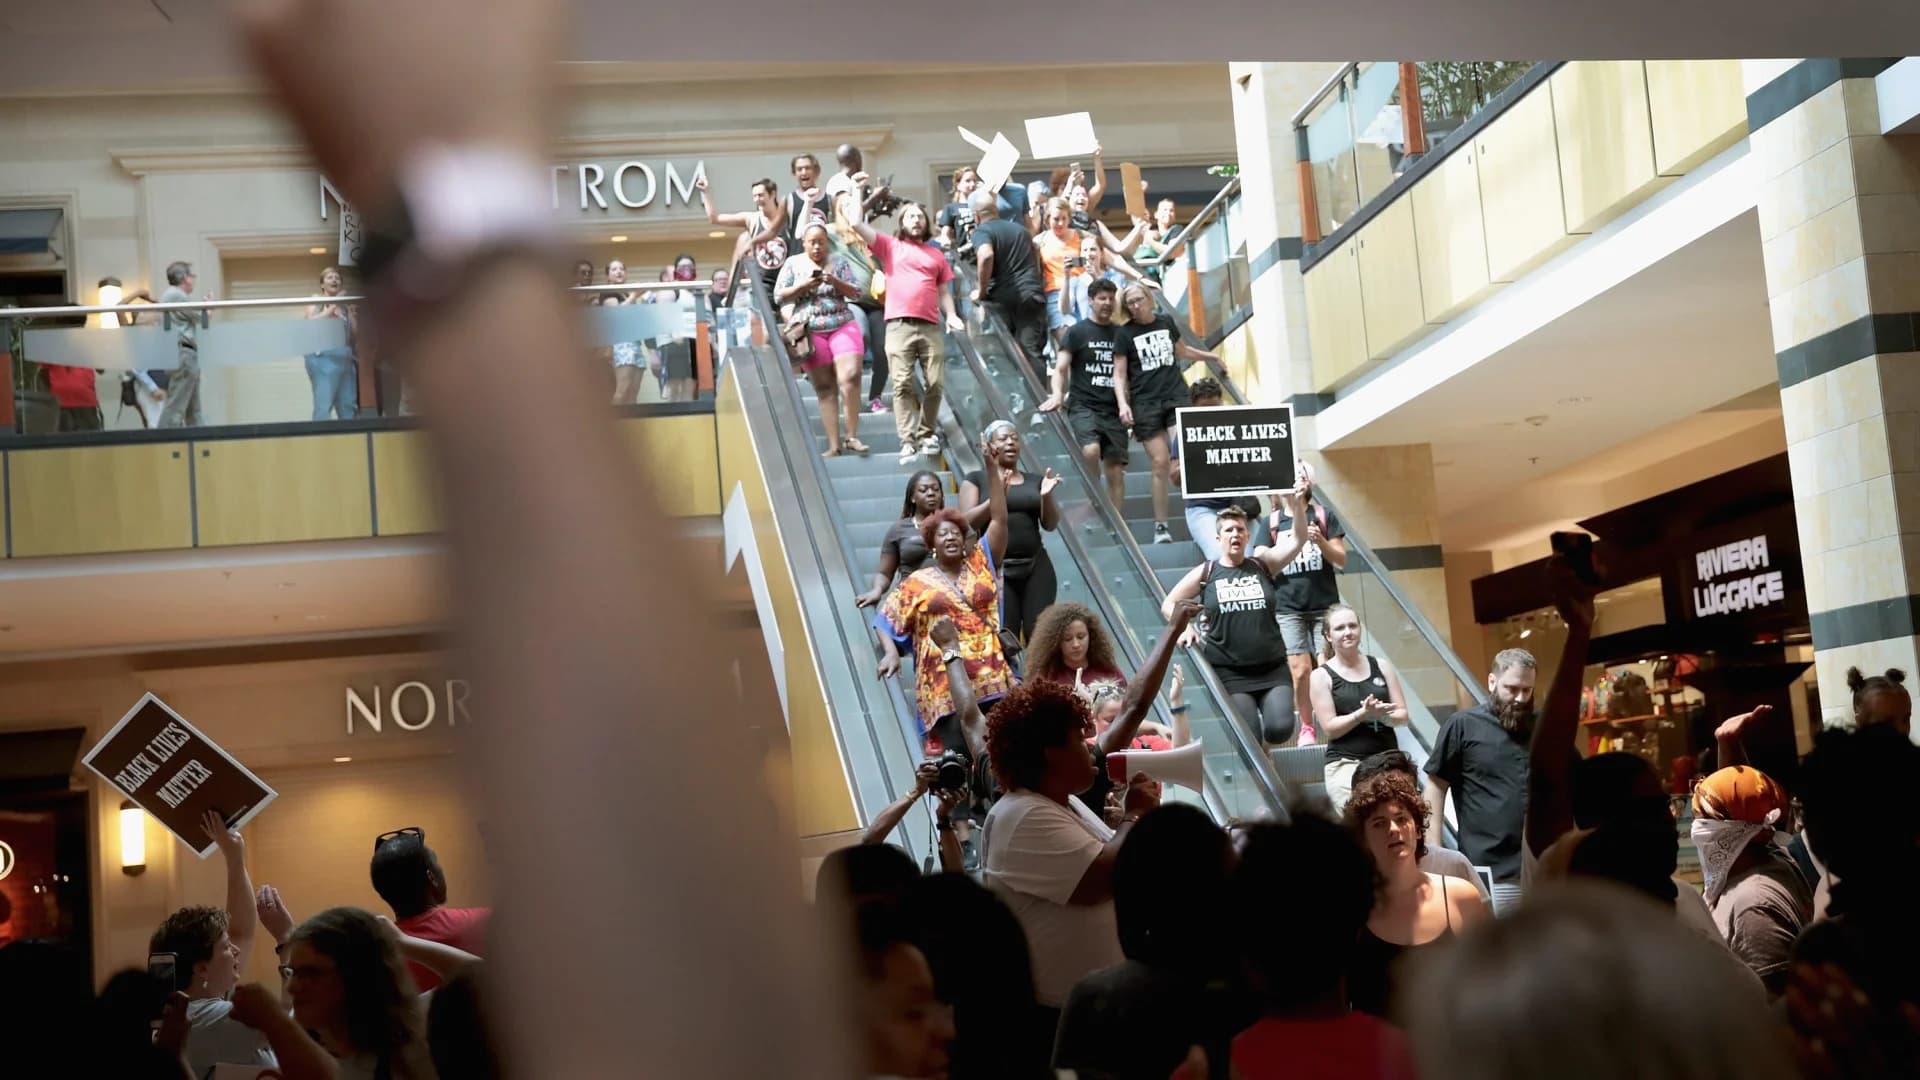 St. Louis protesters go to upscale malls, suburb